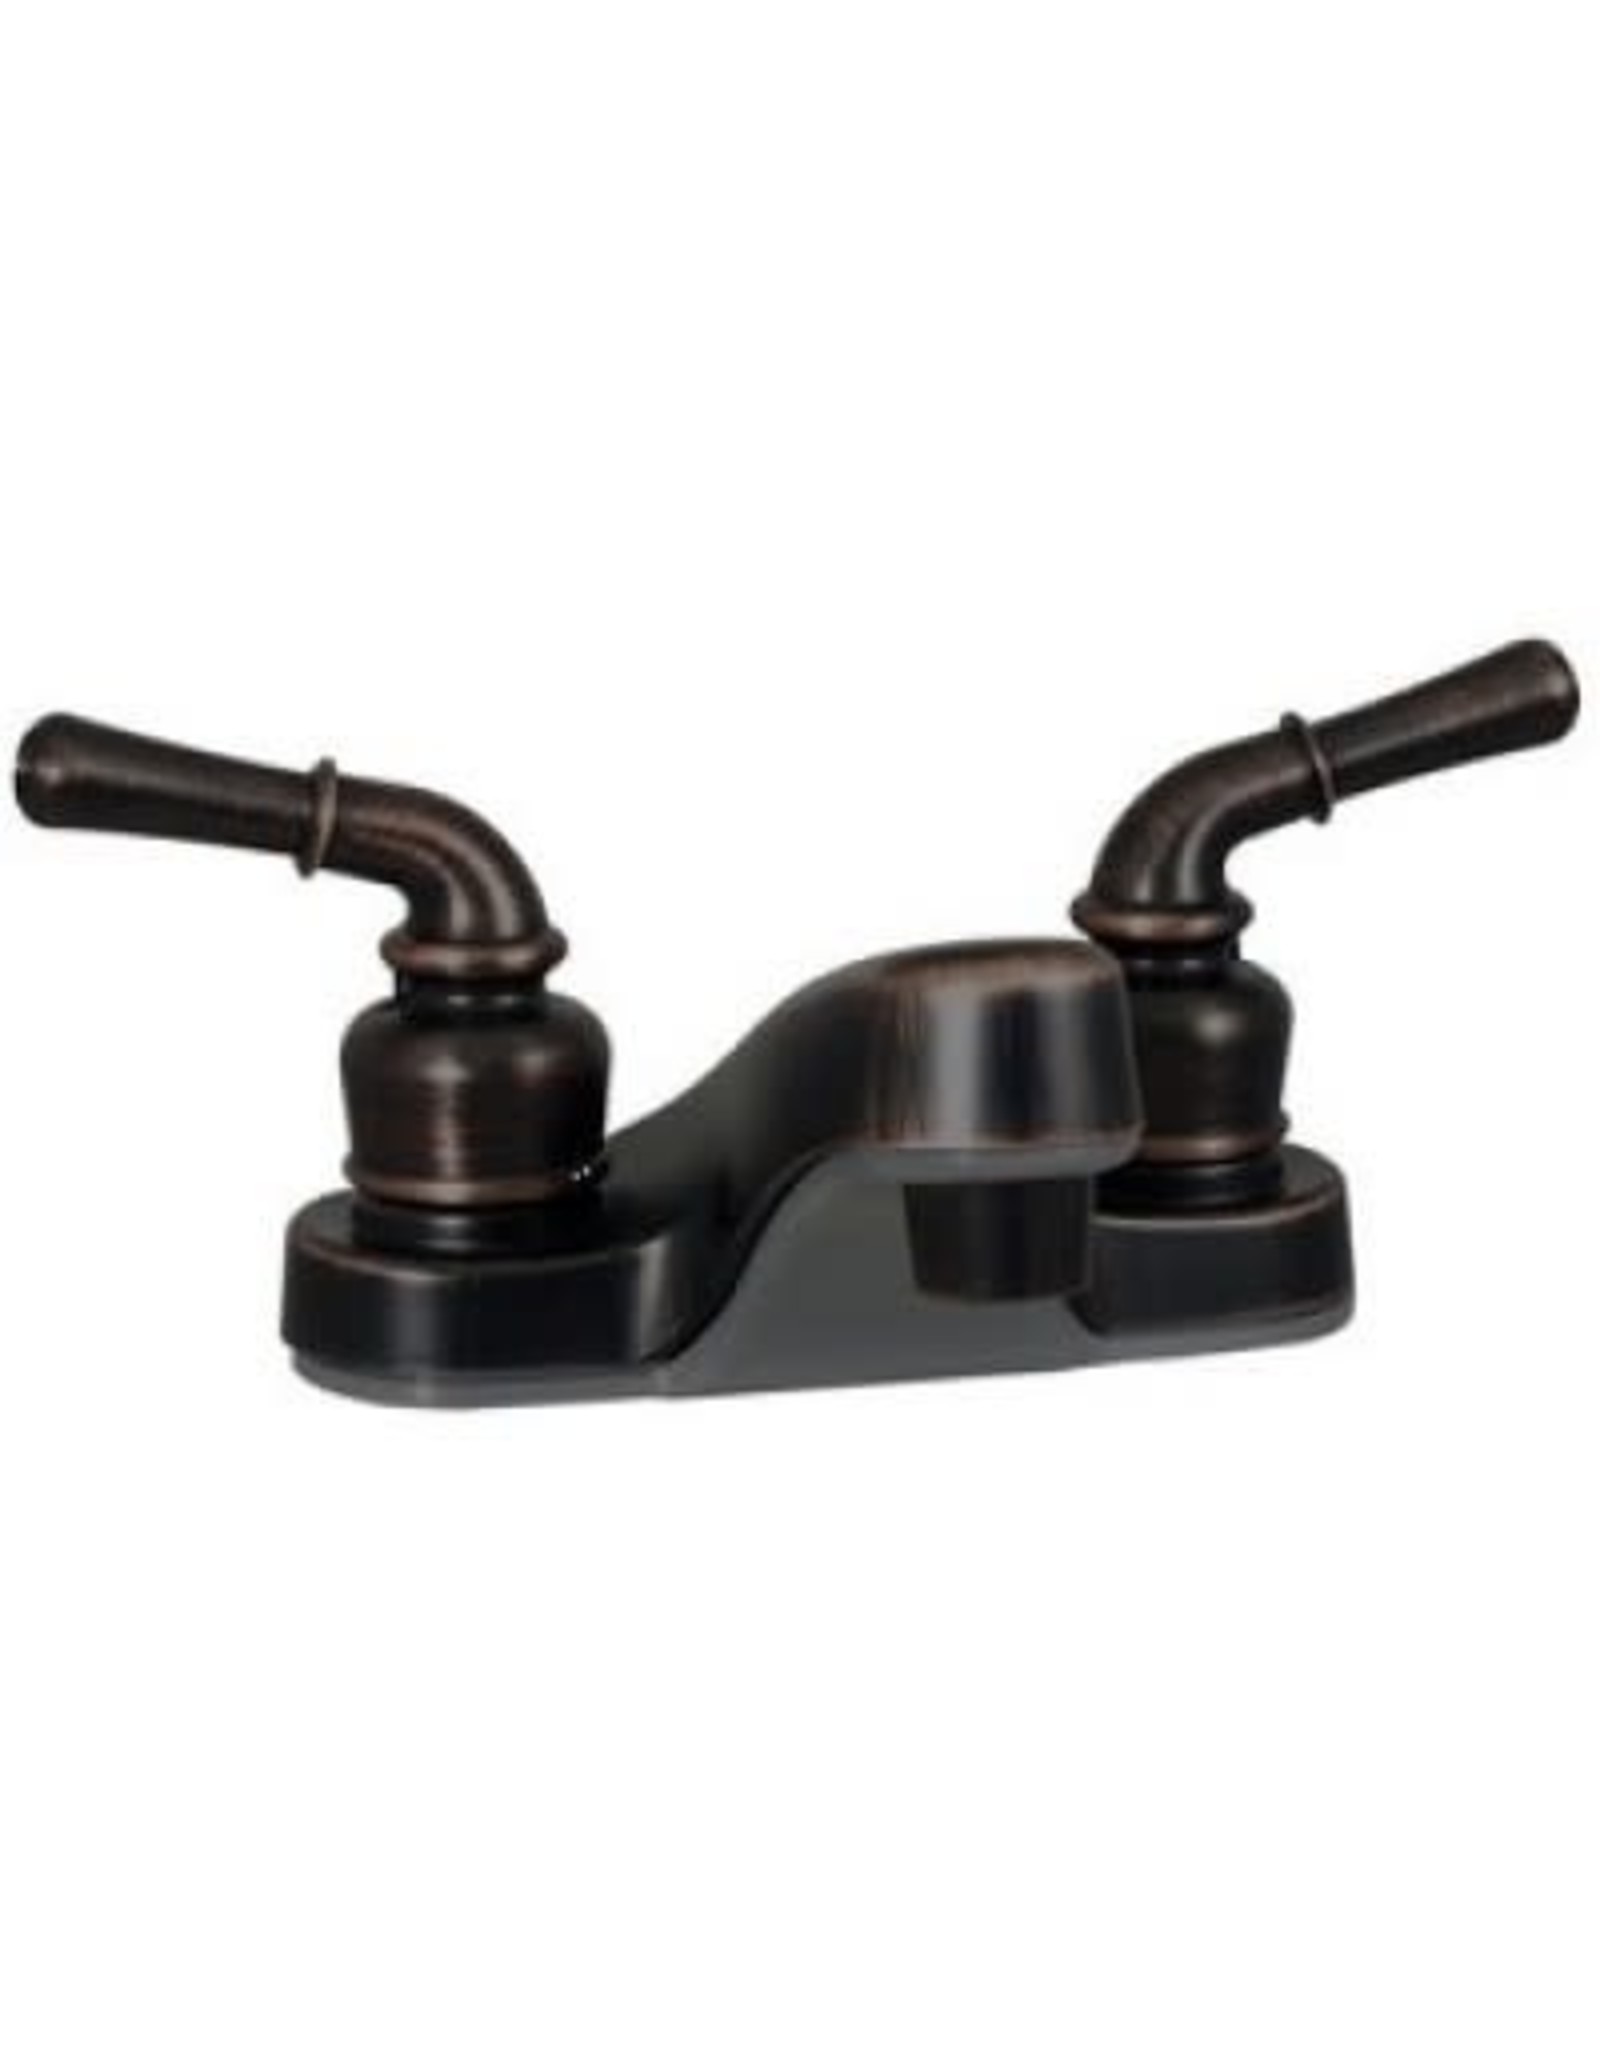 PH FAUCET 4IN LAV RUBBED BRONZE